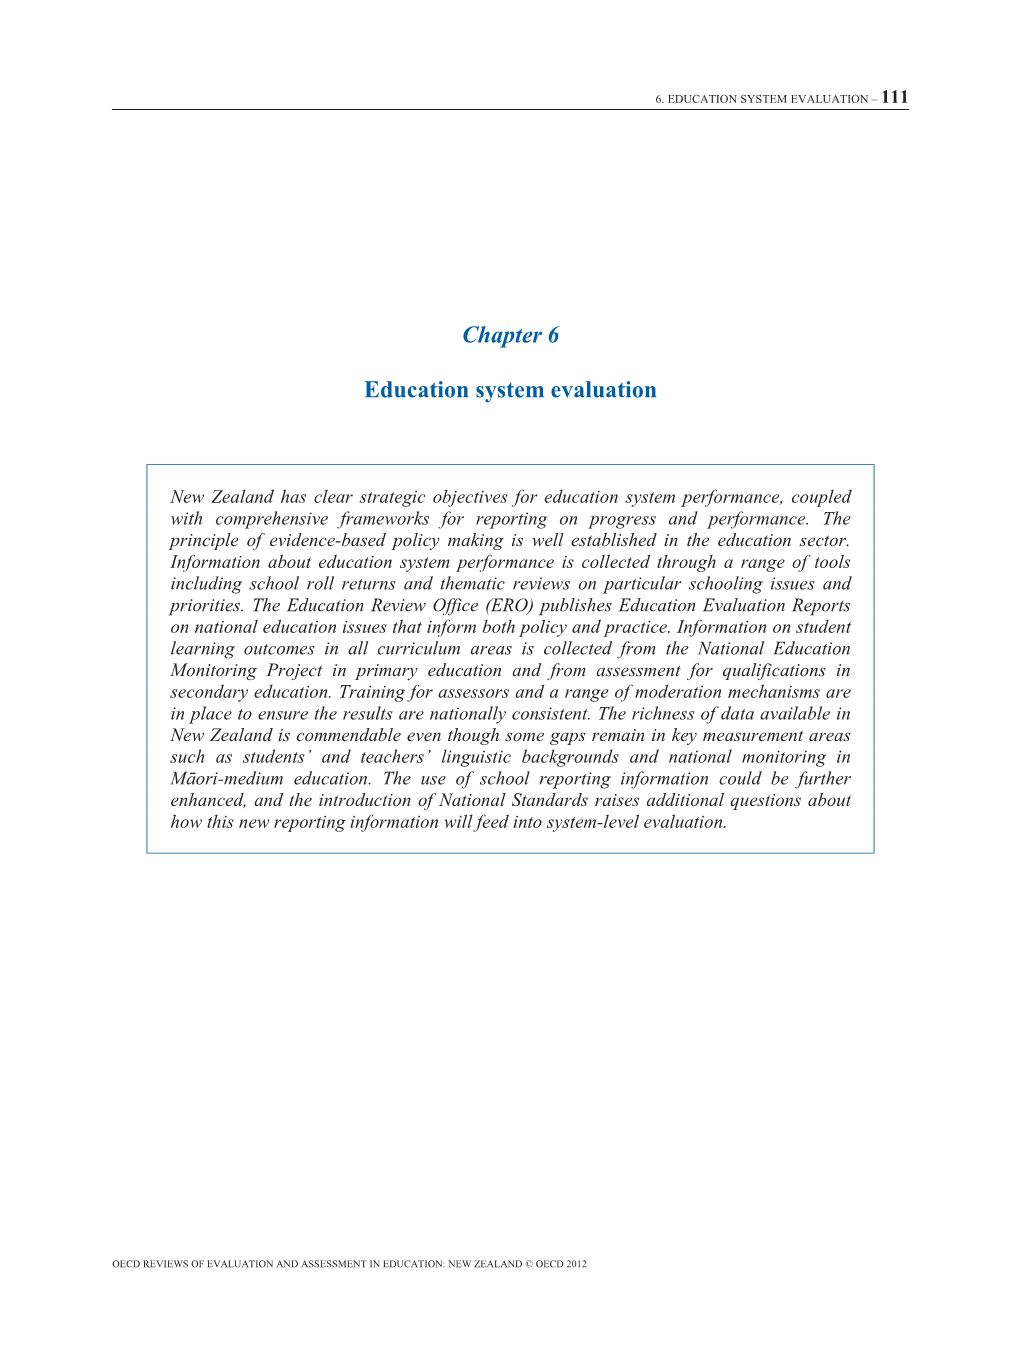 Chapter 6 Education System Evaluation